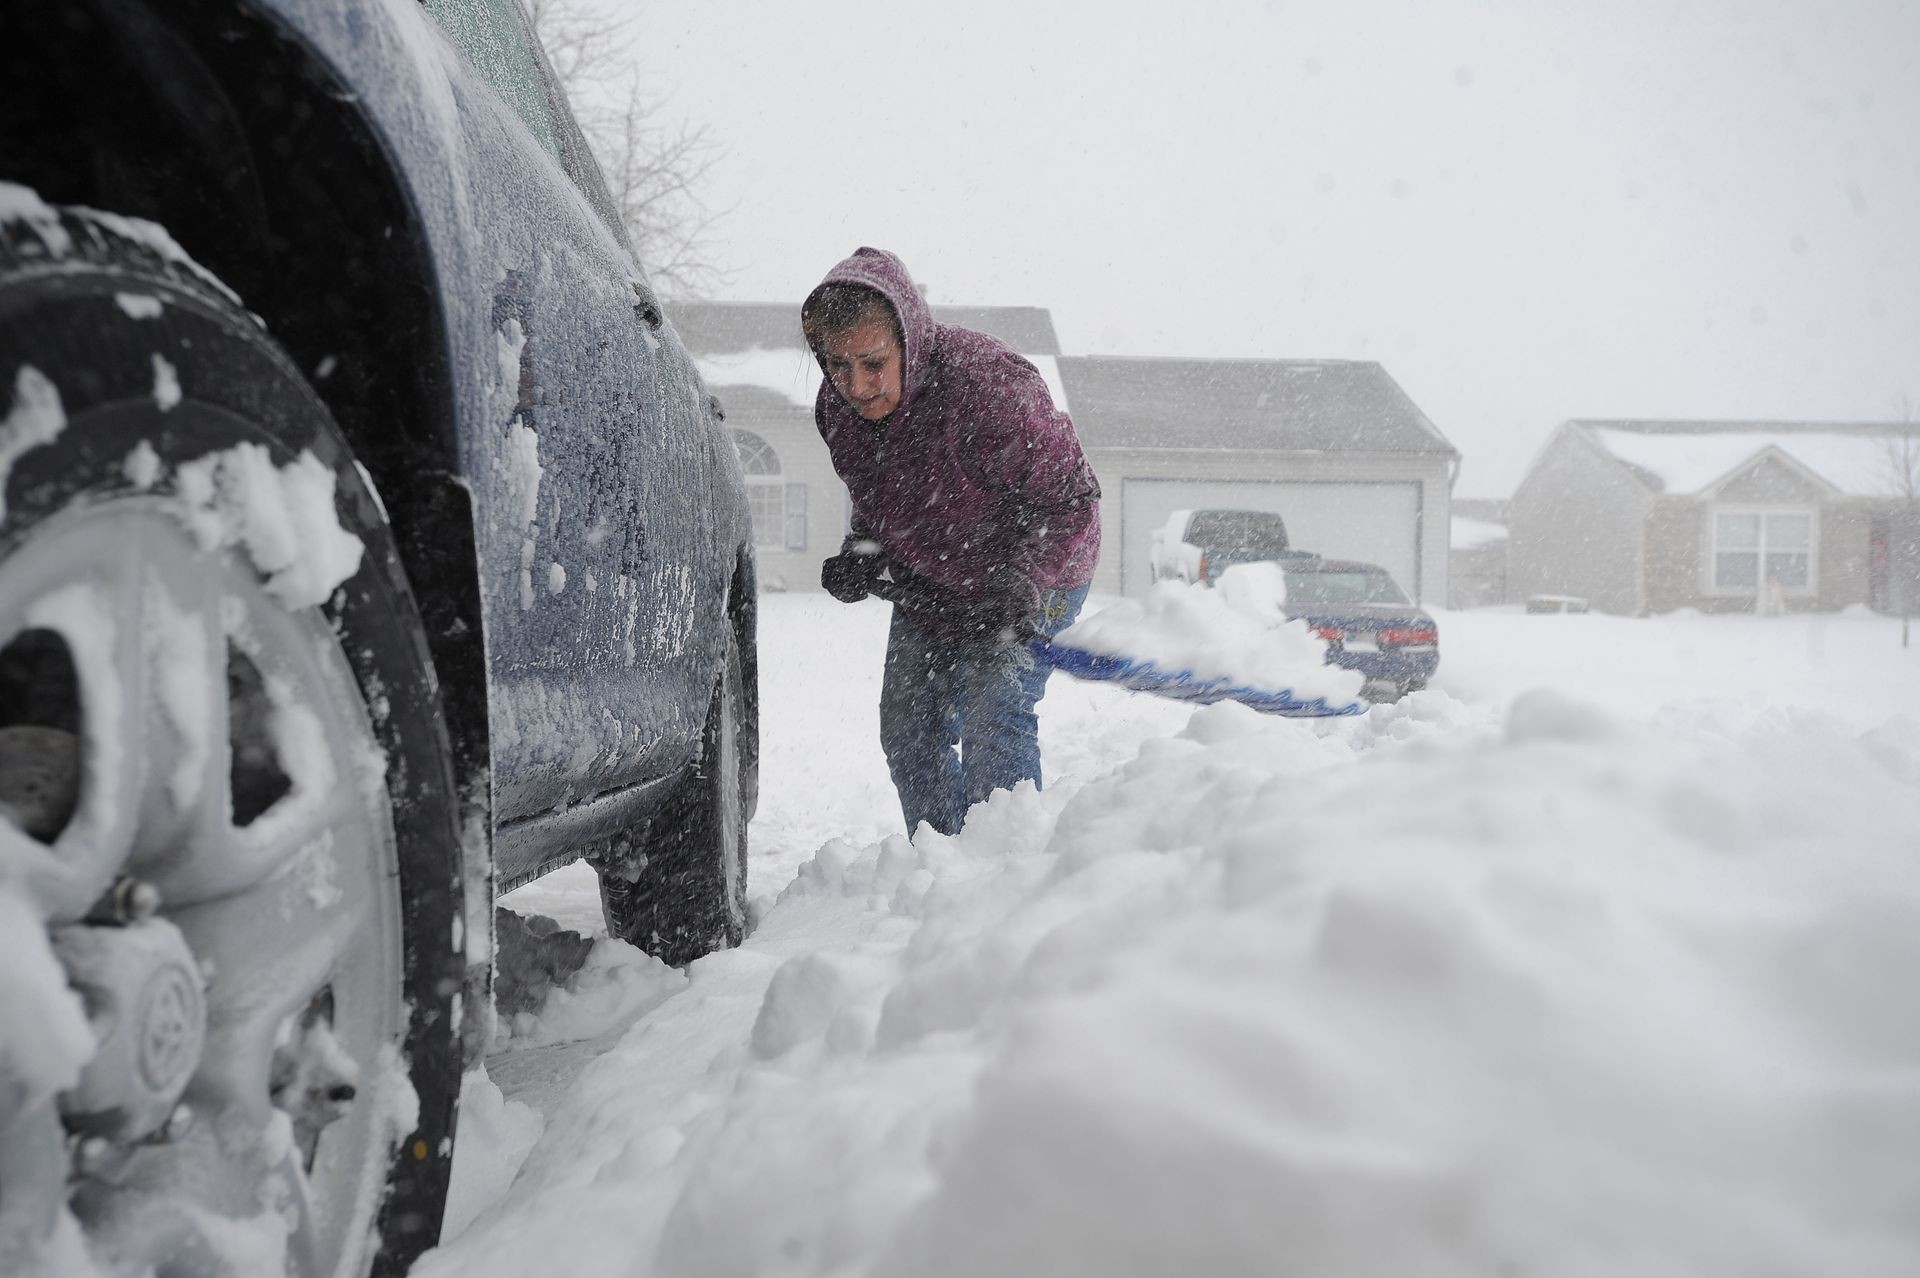 This is a current 2019 view a woman shoveling snow in her driveway in Franklin, Indiana, USA. This is a photo.